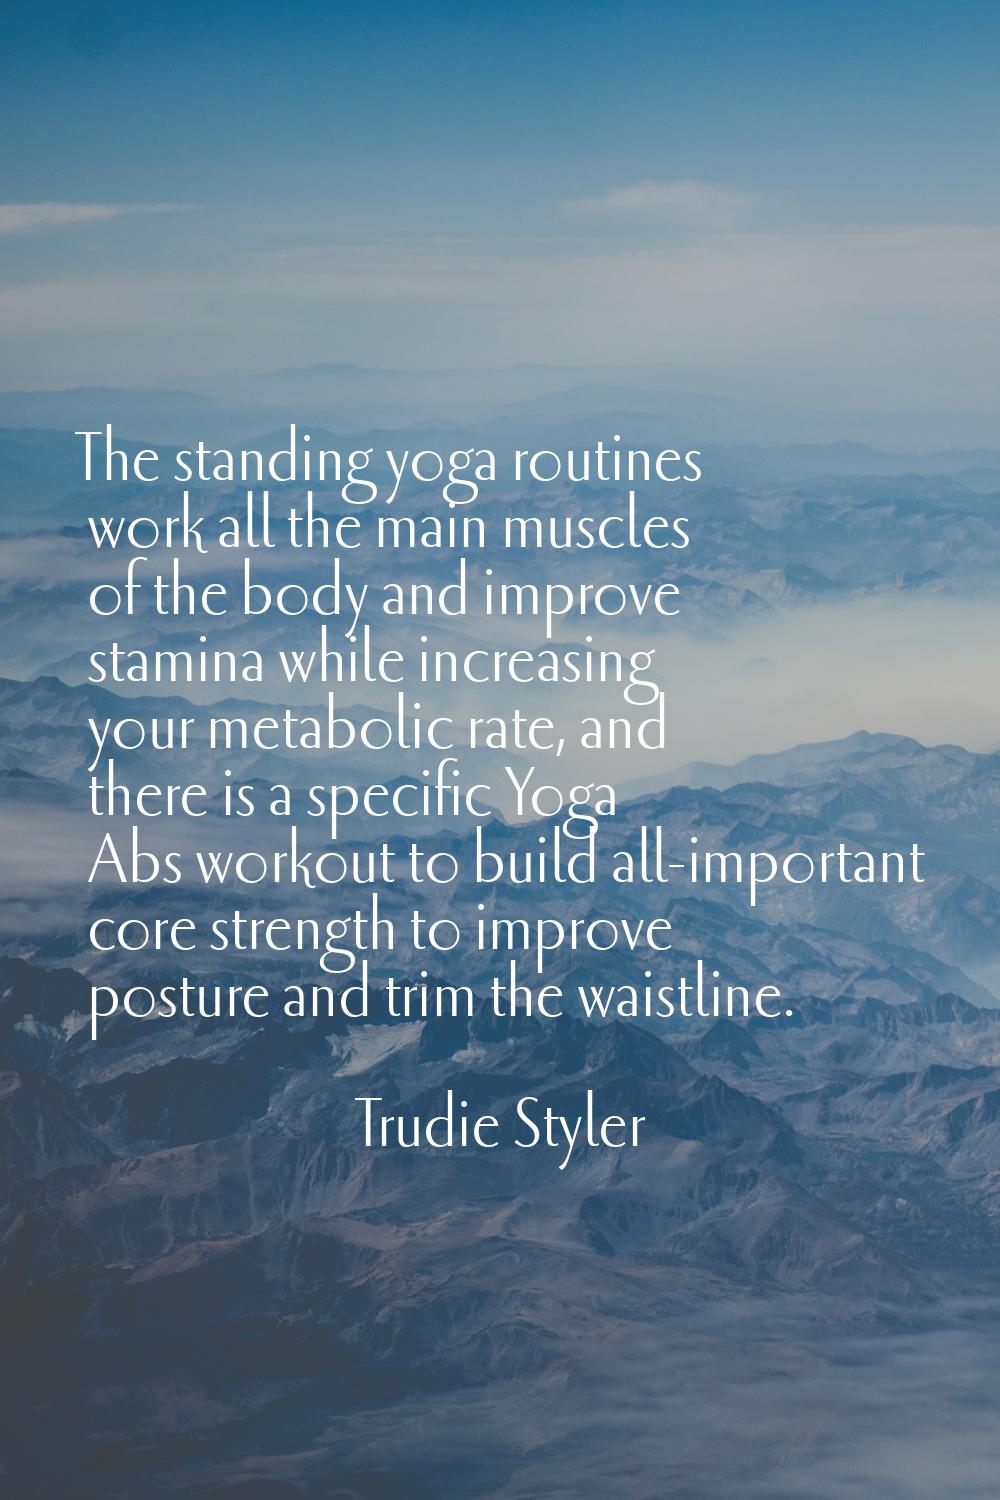 The standing yoga routines work all the main muscles of the body and improve stamina while increasi